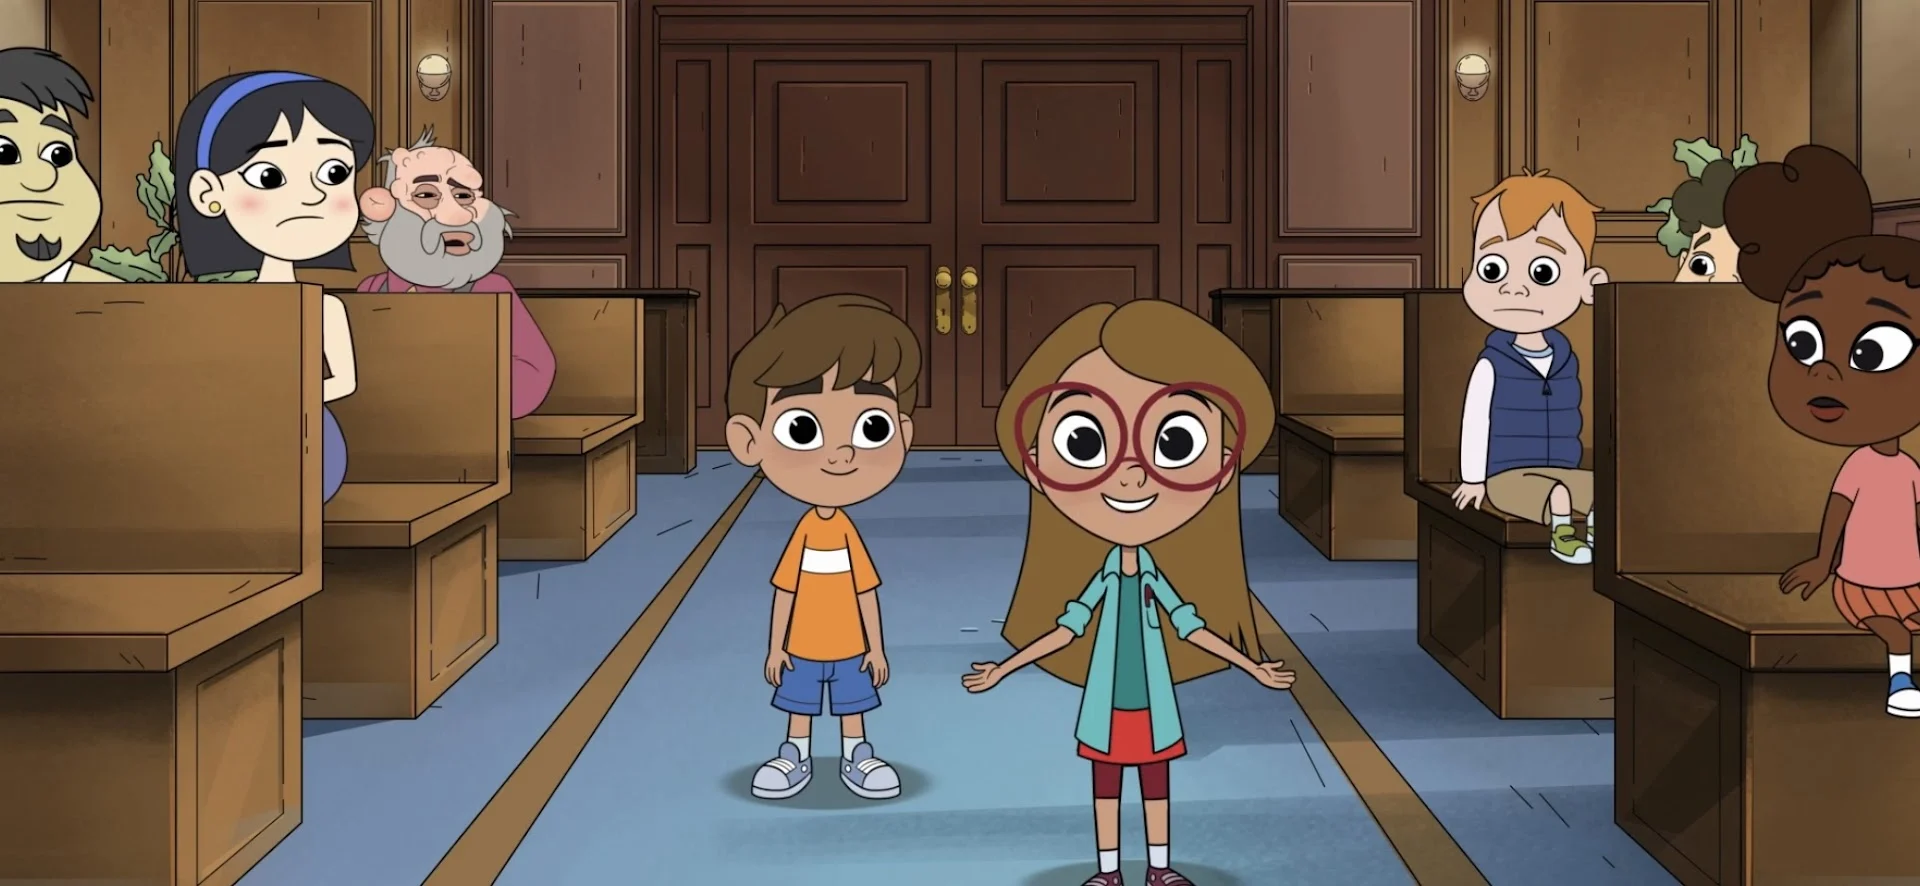 Image of Ethan and Emily in the council chambers